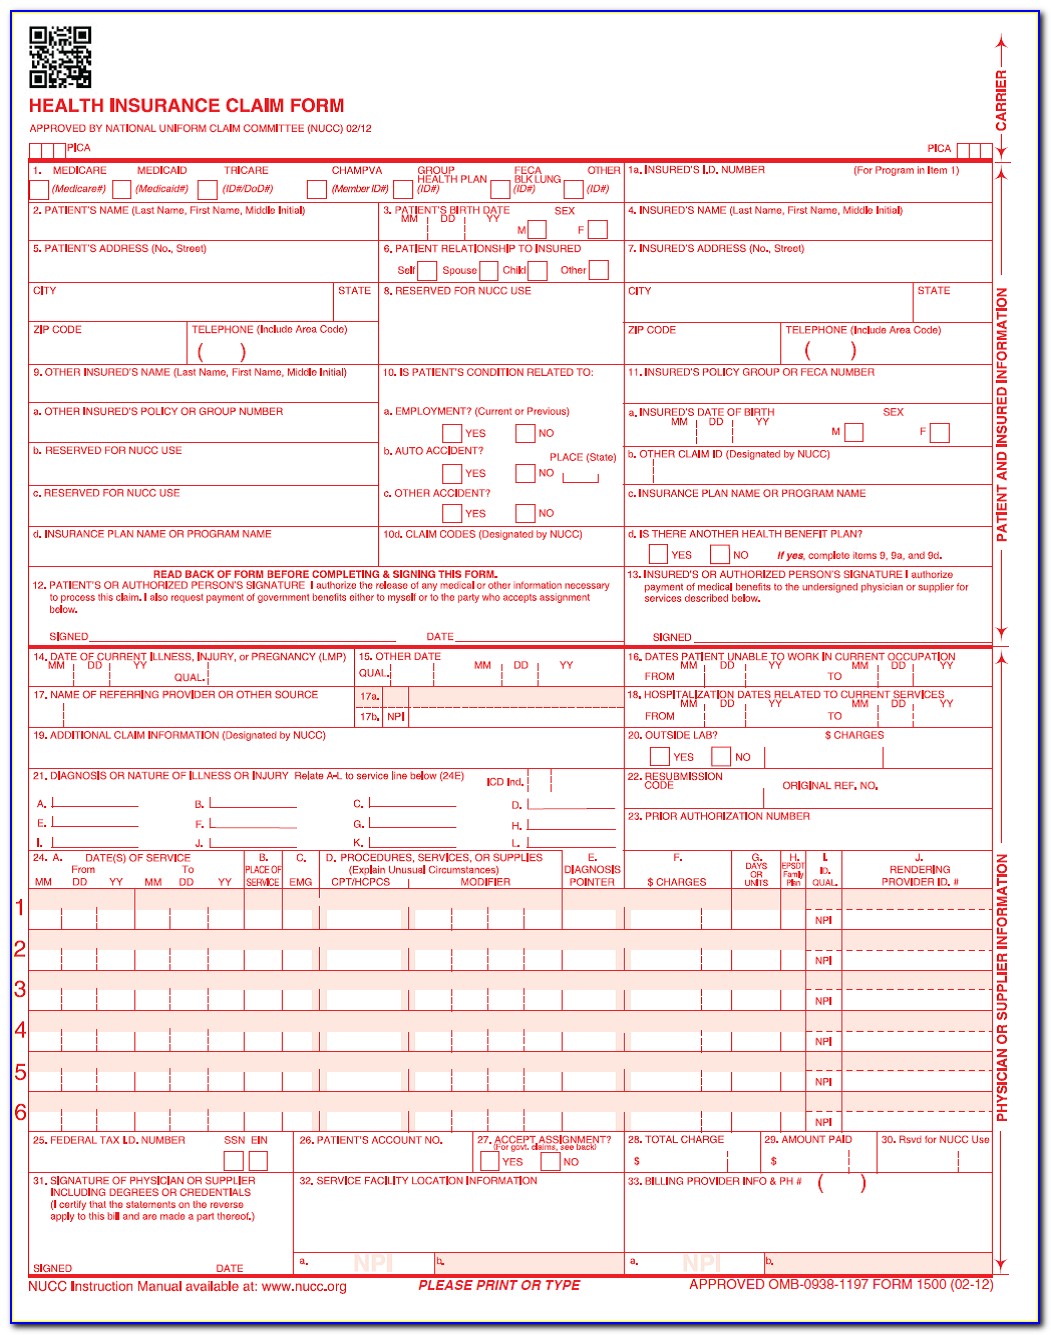 Example Hcfa 1500 Form Filled Out